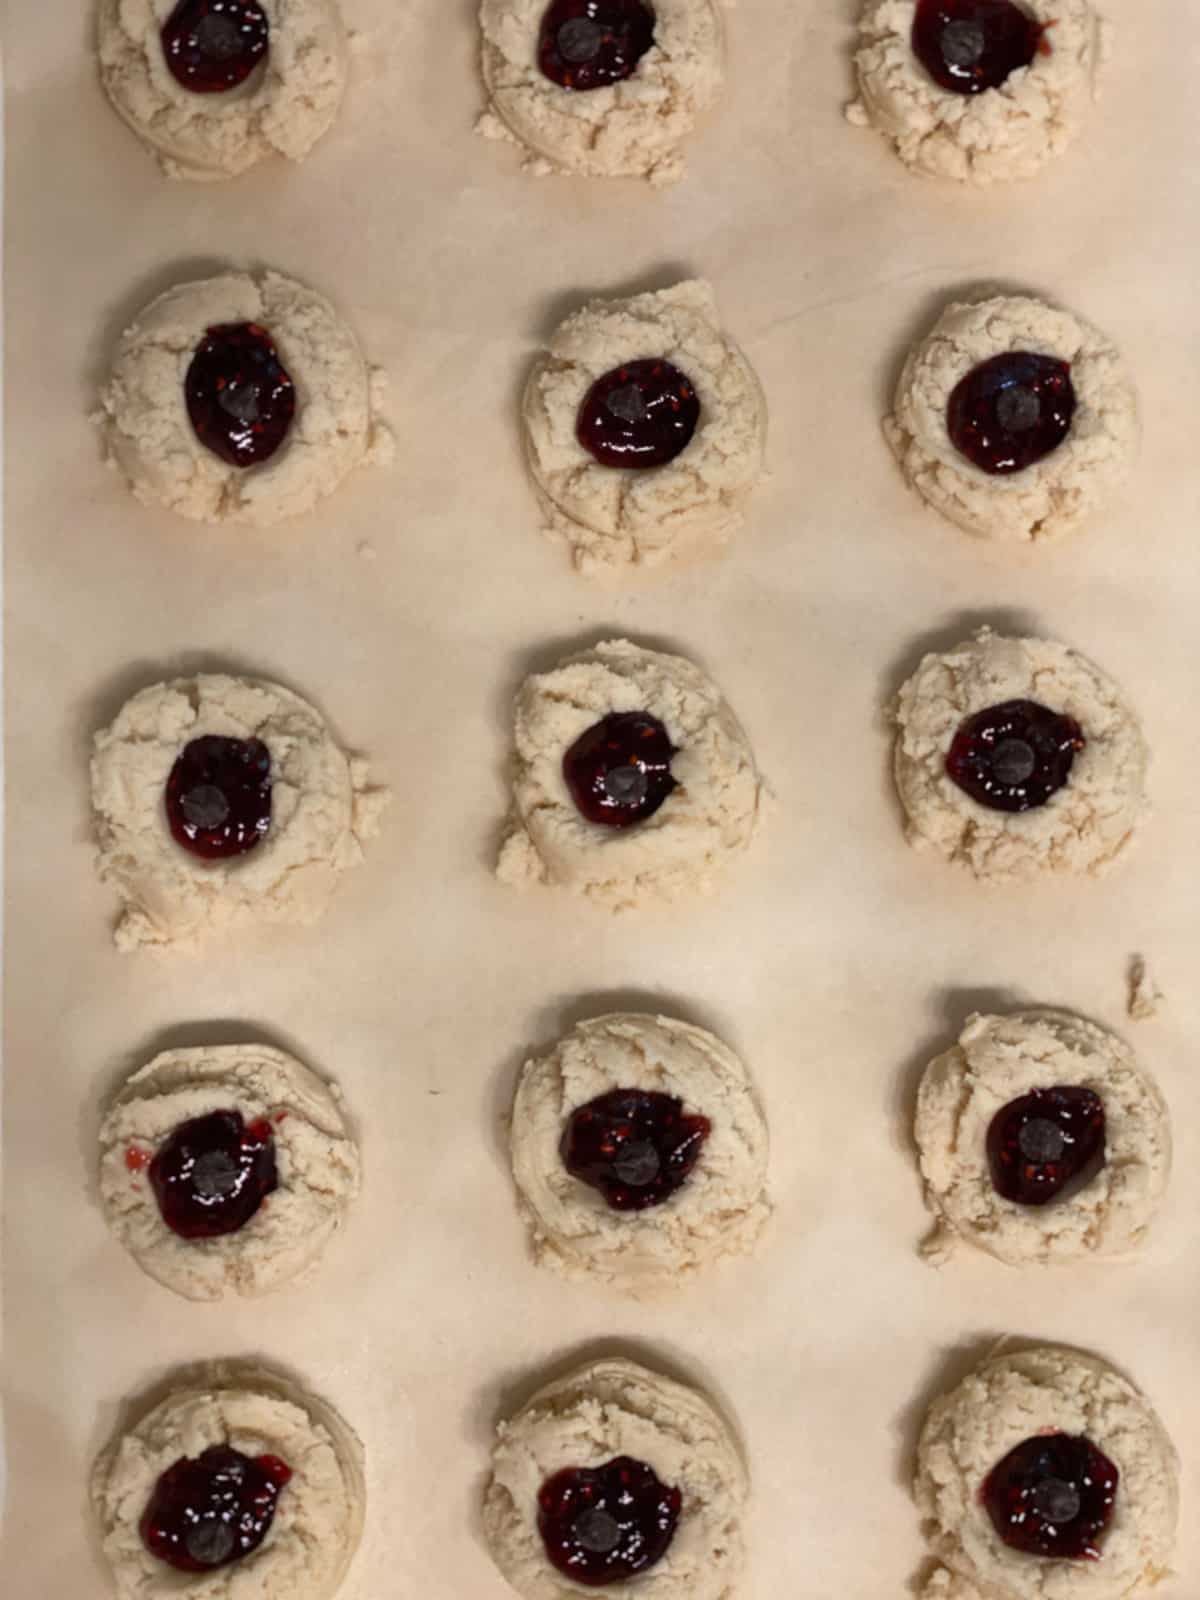 pre baked Raspberry Jam Thumbprint Cookies scattered on a baking sheet